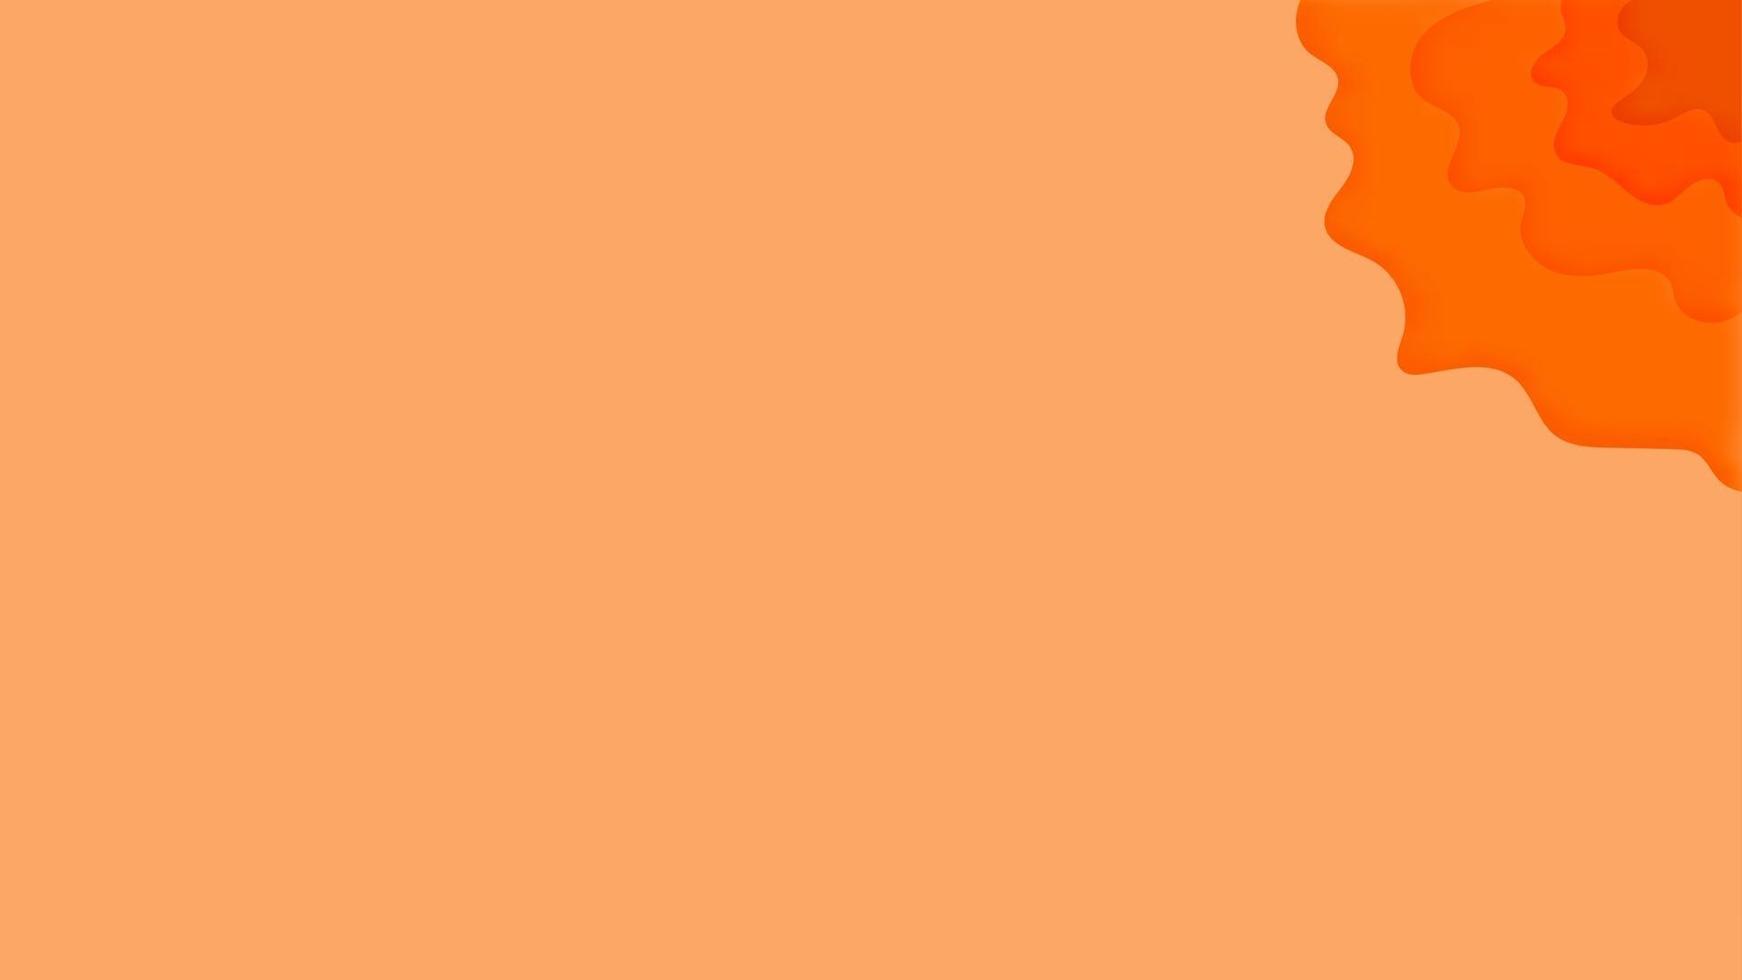 Orange paper cut background abstract with shadow gradient papercut vector